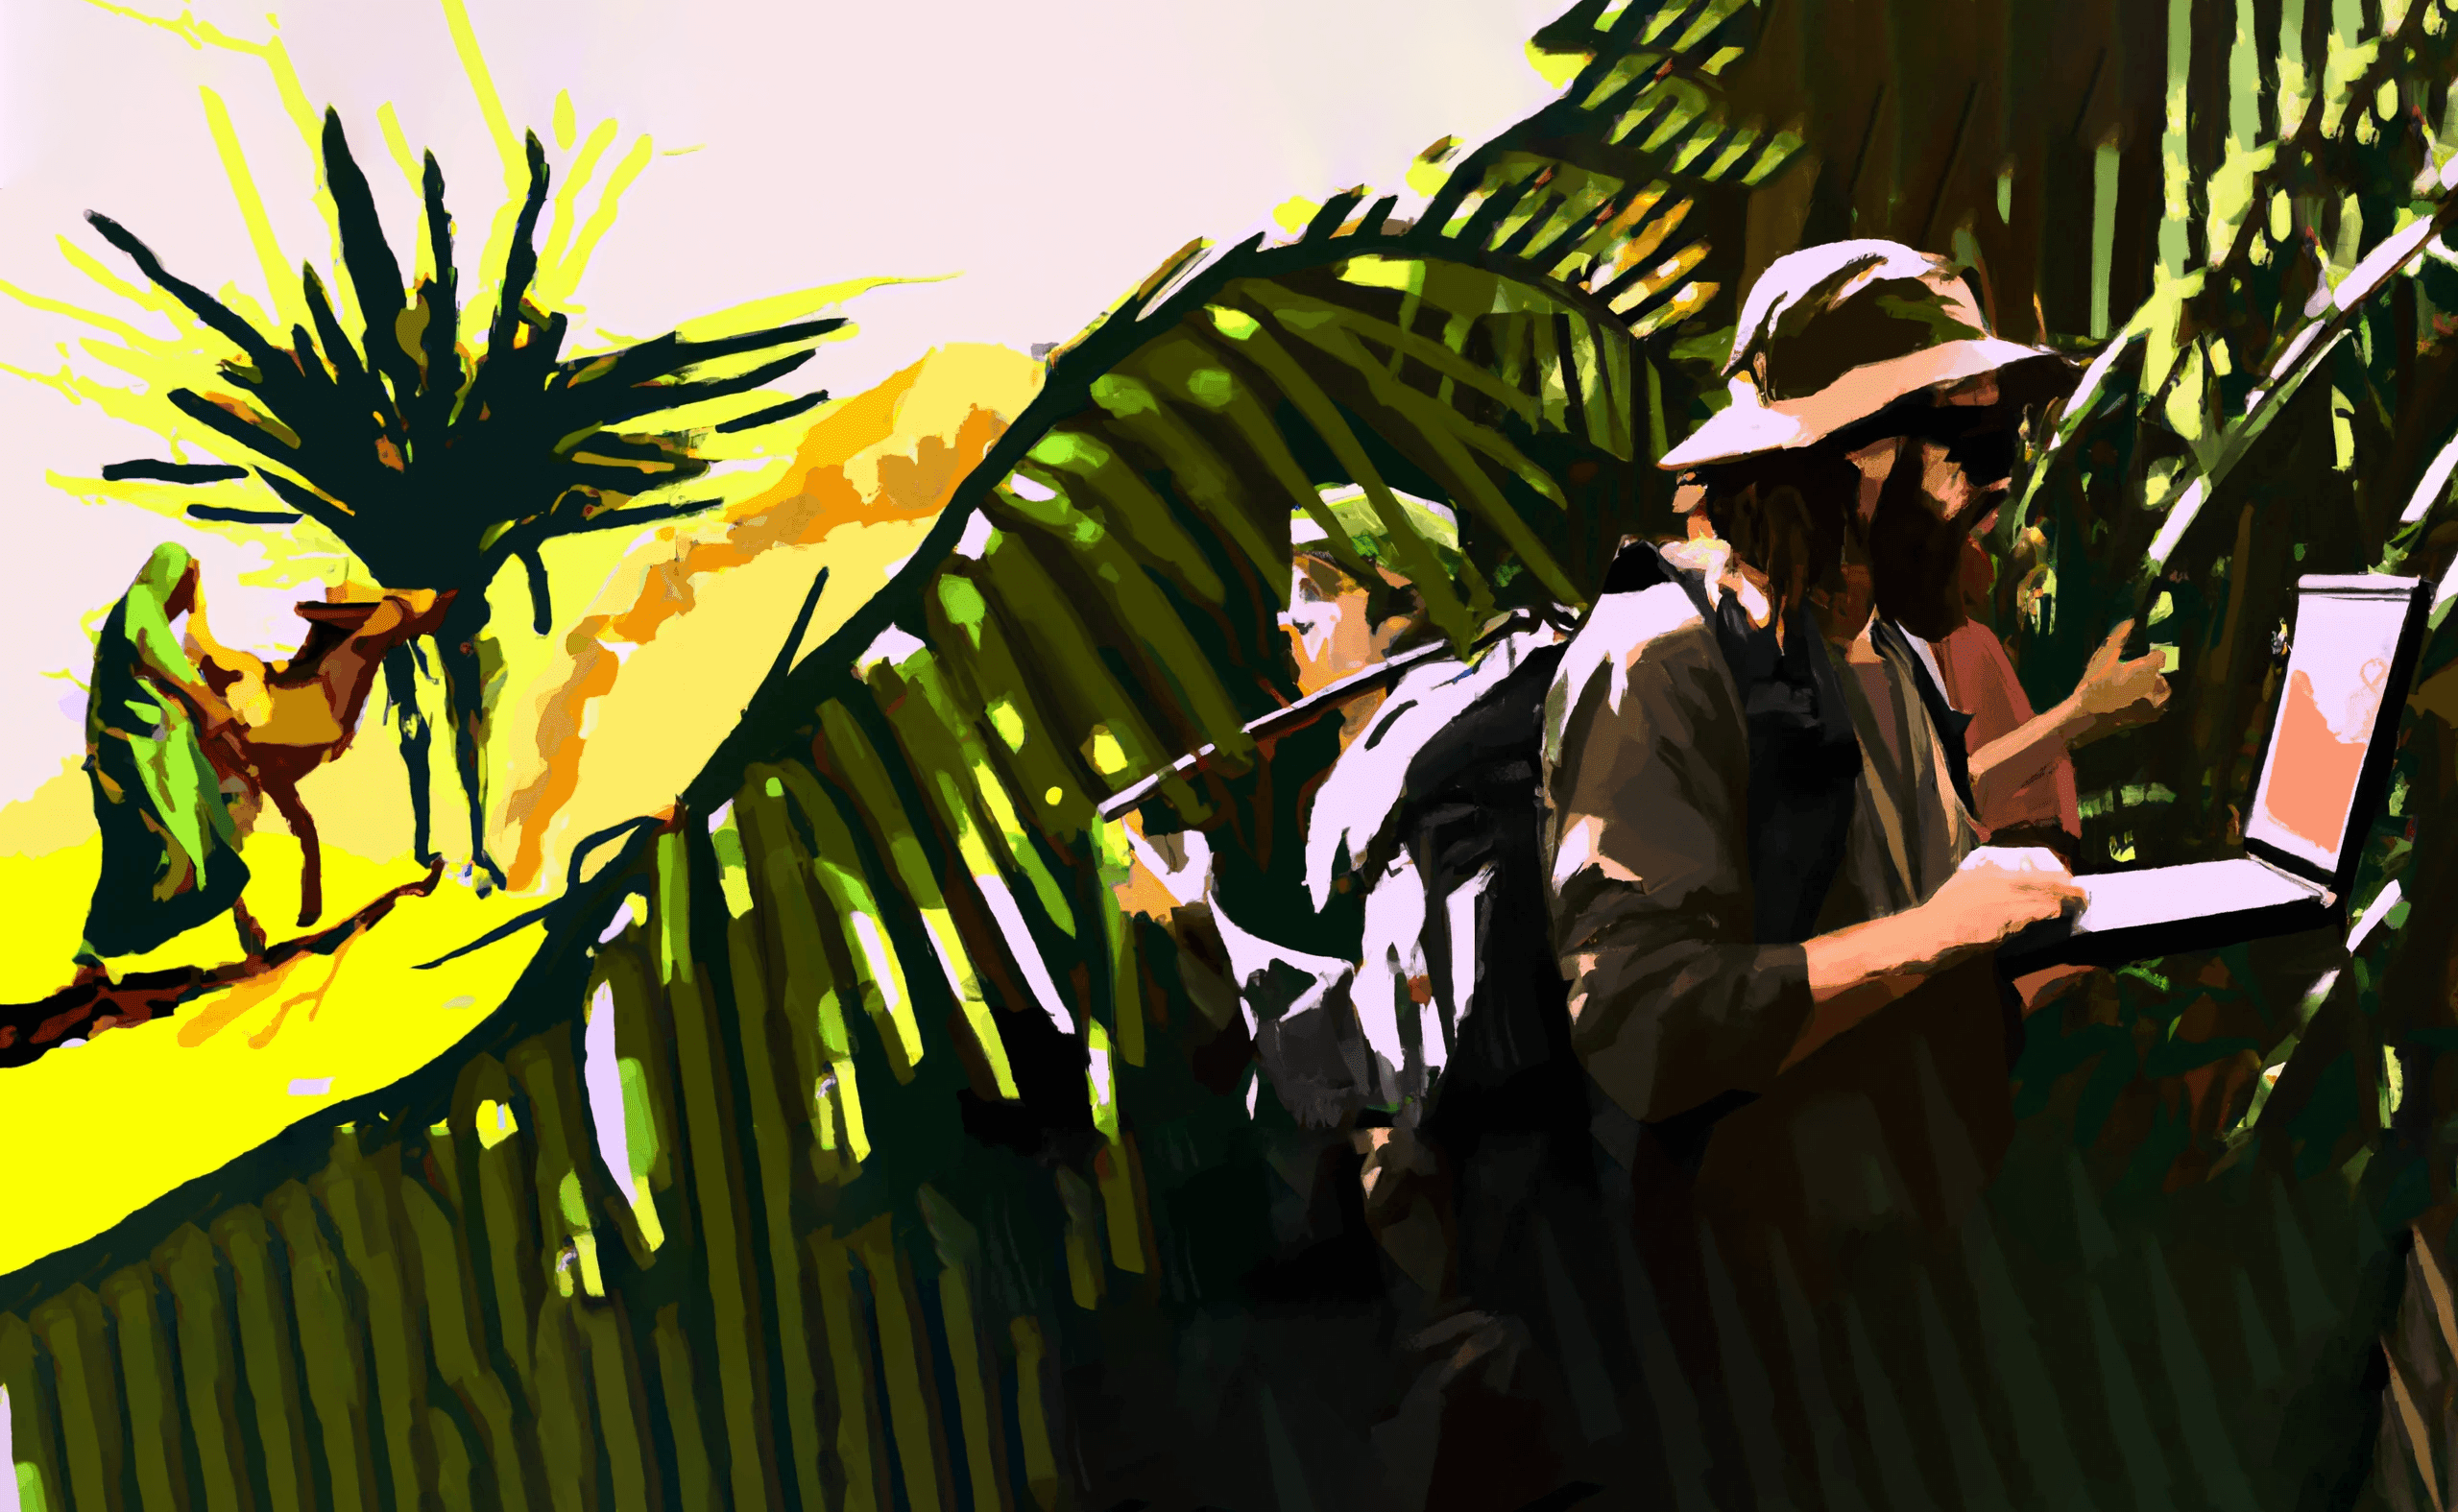 On the left there is a traditional nomad, a more modern nomad with a lance in the middle and a digital nomad on the right carrying a laptop. The scene happens in a tropical jungle and is made with digital art